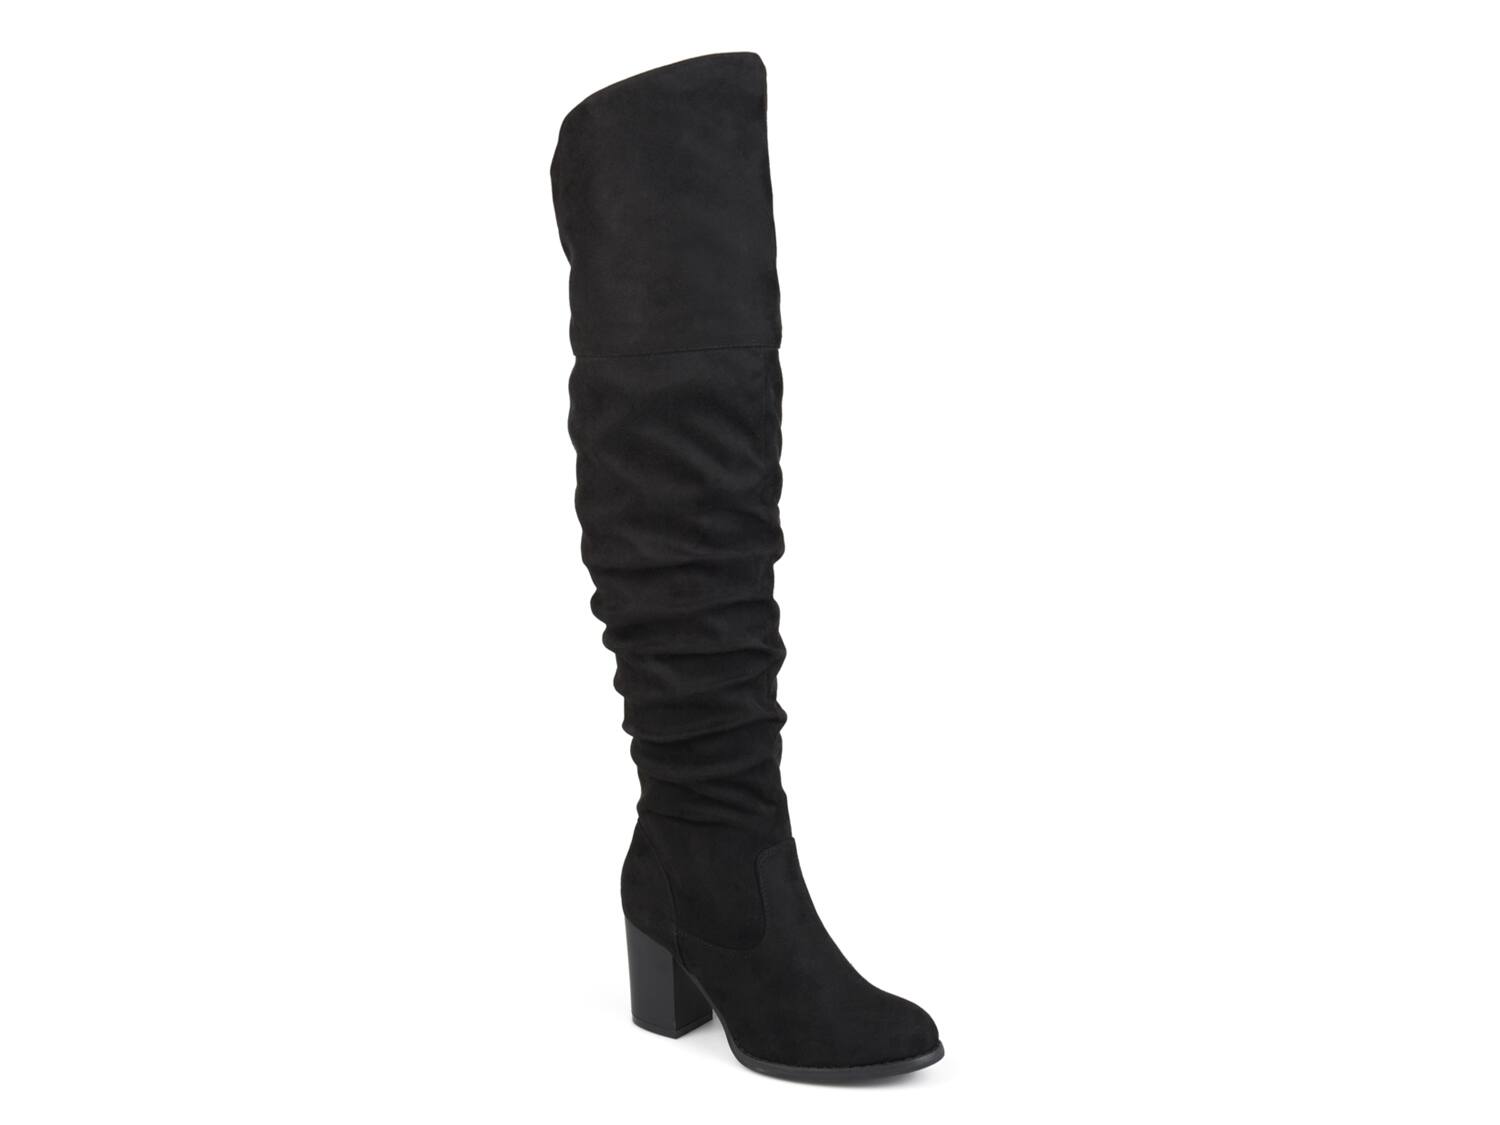 Journee Collection Kaison Extra Wide Calf Over-the-Knee Boot - Free ...